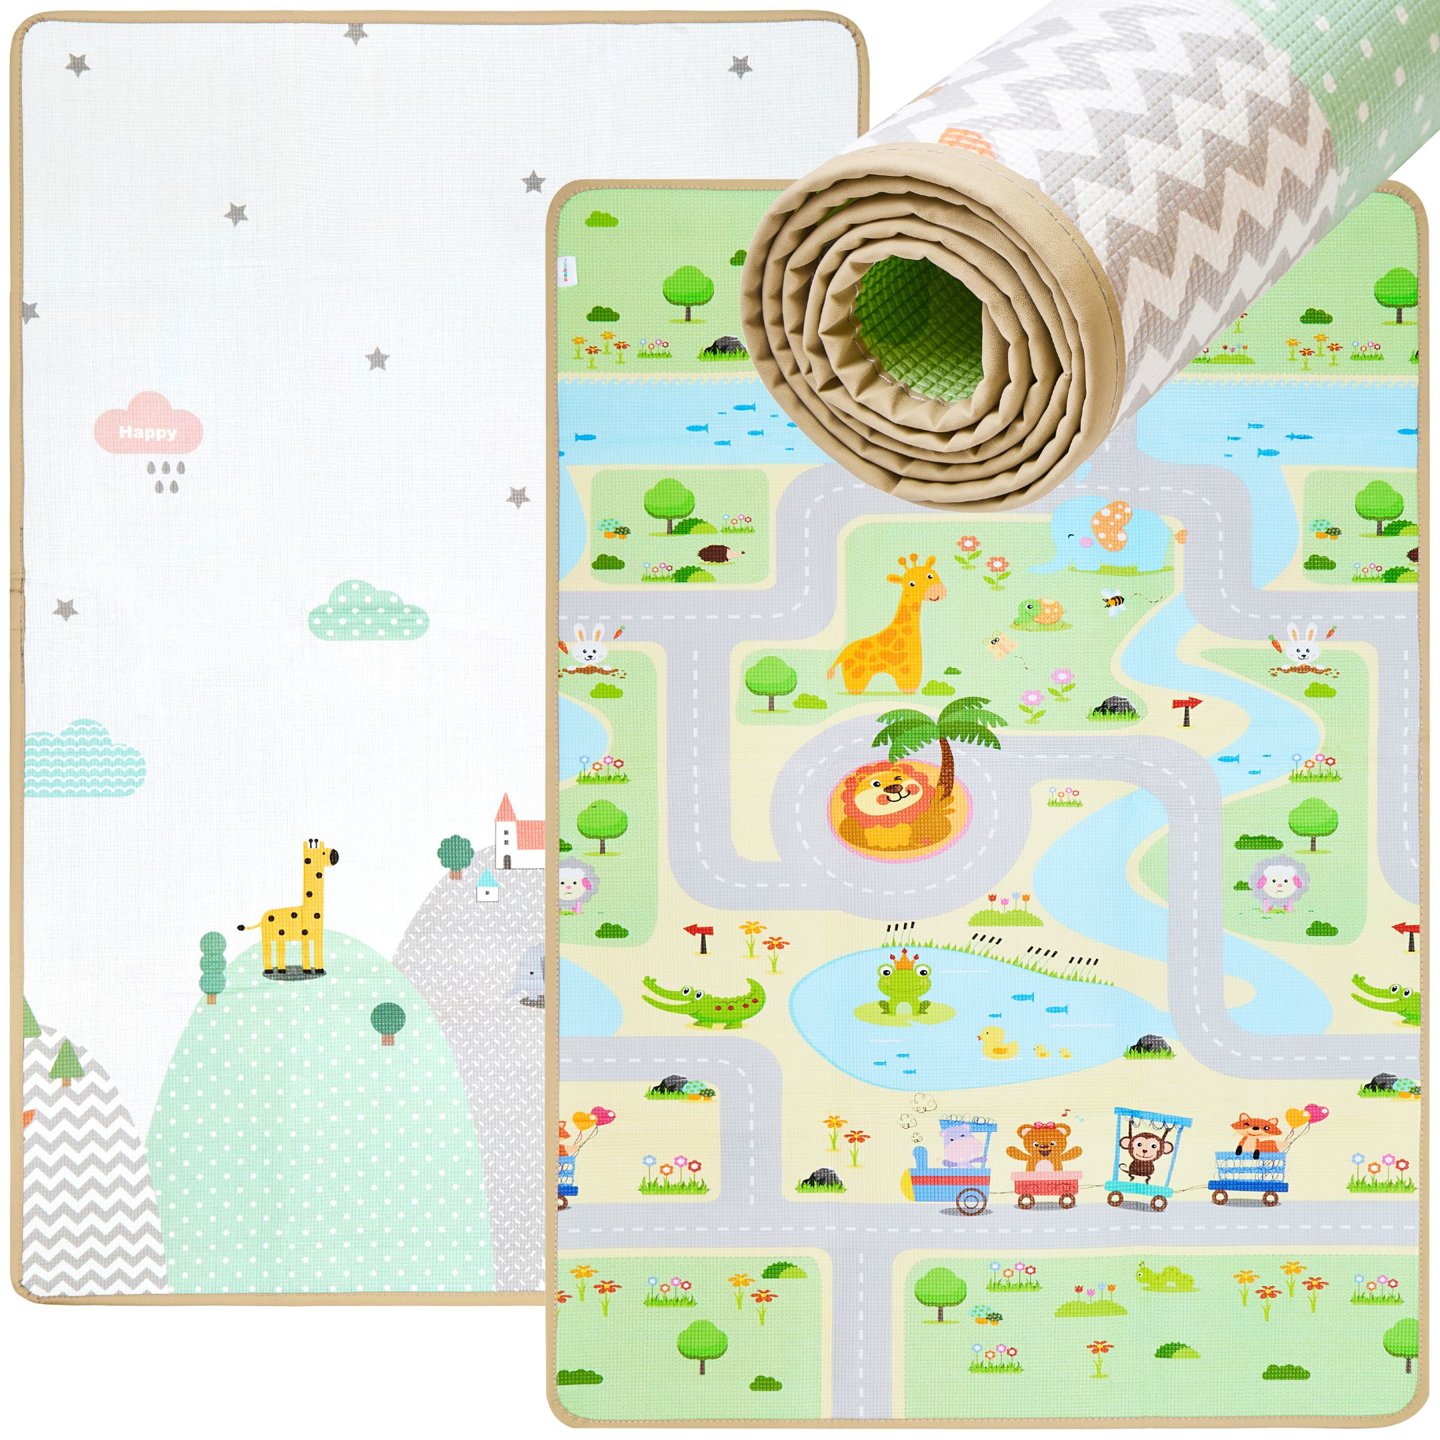 Double-sided foam mat - pattern: forest on the hill / sunny town